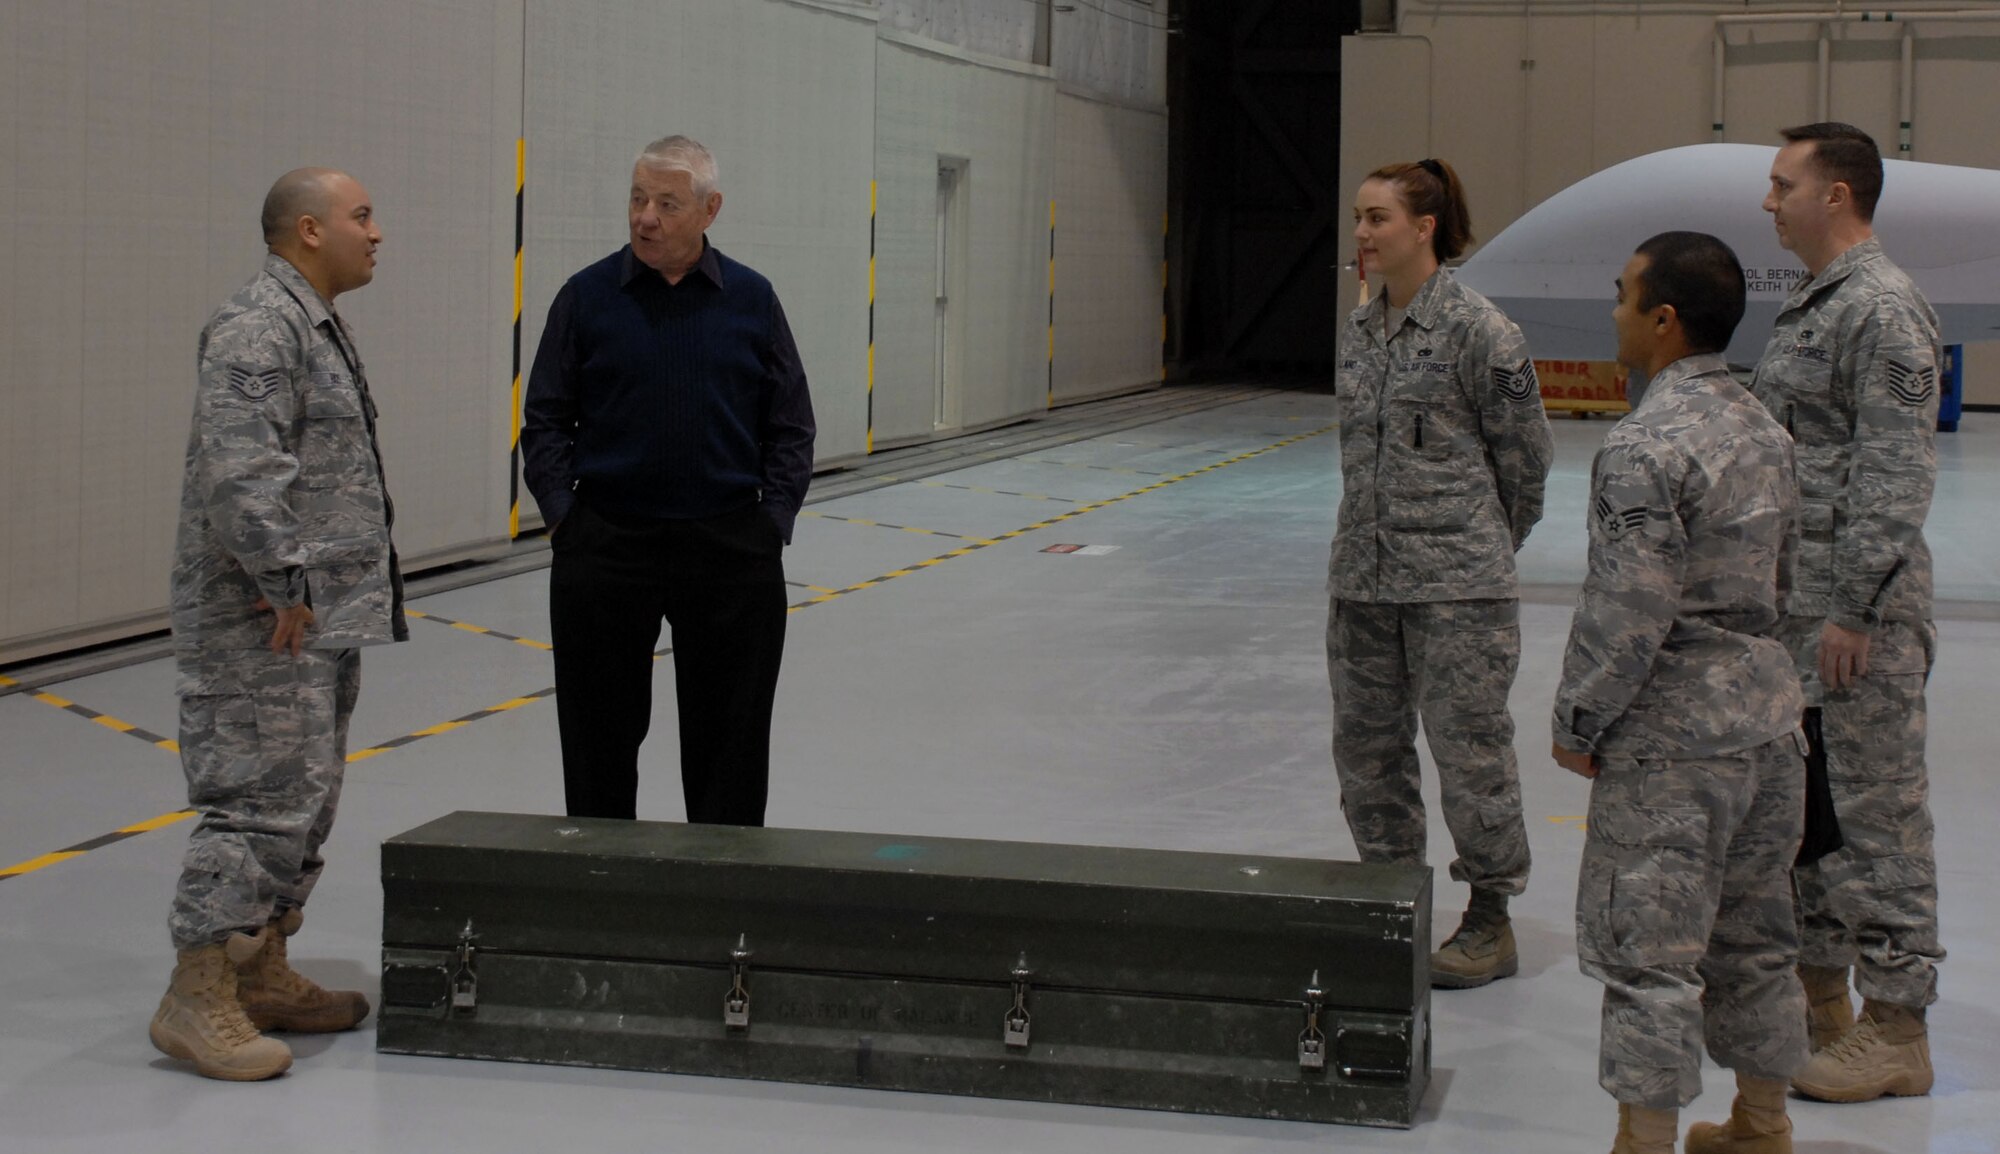 CREECH AFB, Nev. -- Former Chief Master Sergeant of the Air Force Robert Gaylor, meets Airmen assigned to the 432d Aircraft Maintenance Squadron, here Feb 25. Chief Gaylor was the fifth Chief Master Sergeant of the Air Force. (U.S. Air Force photo/1st Lt. Kevin Milgram) 